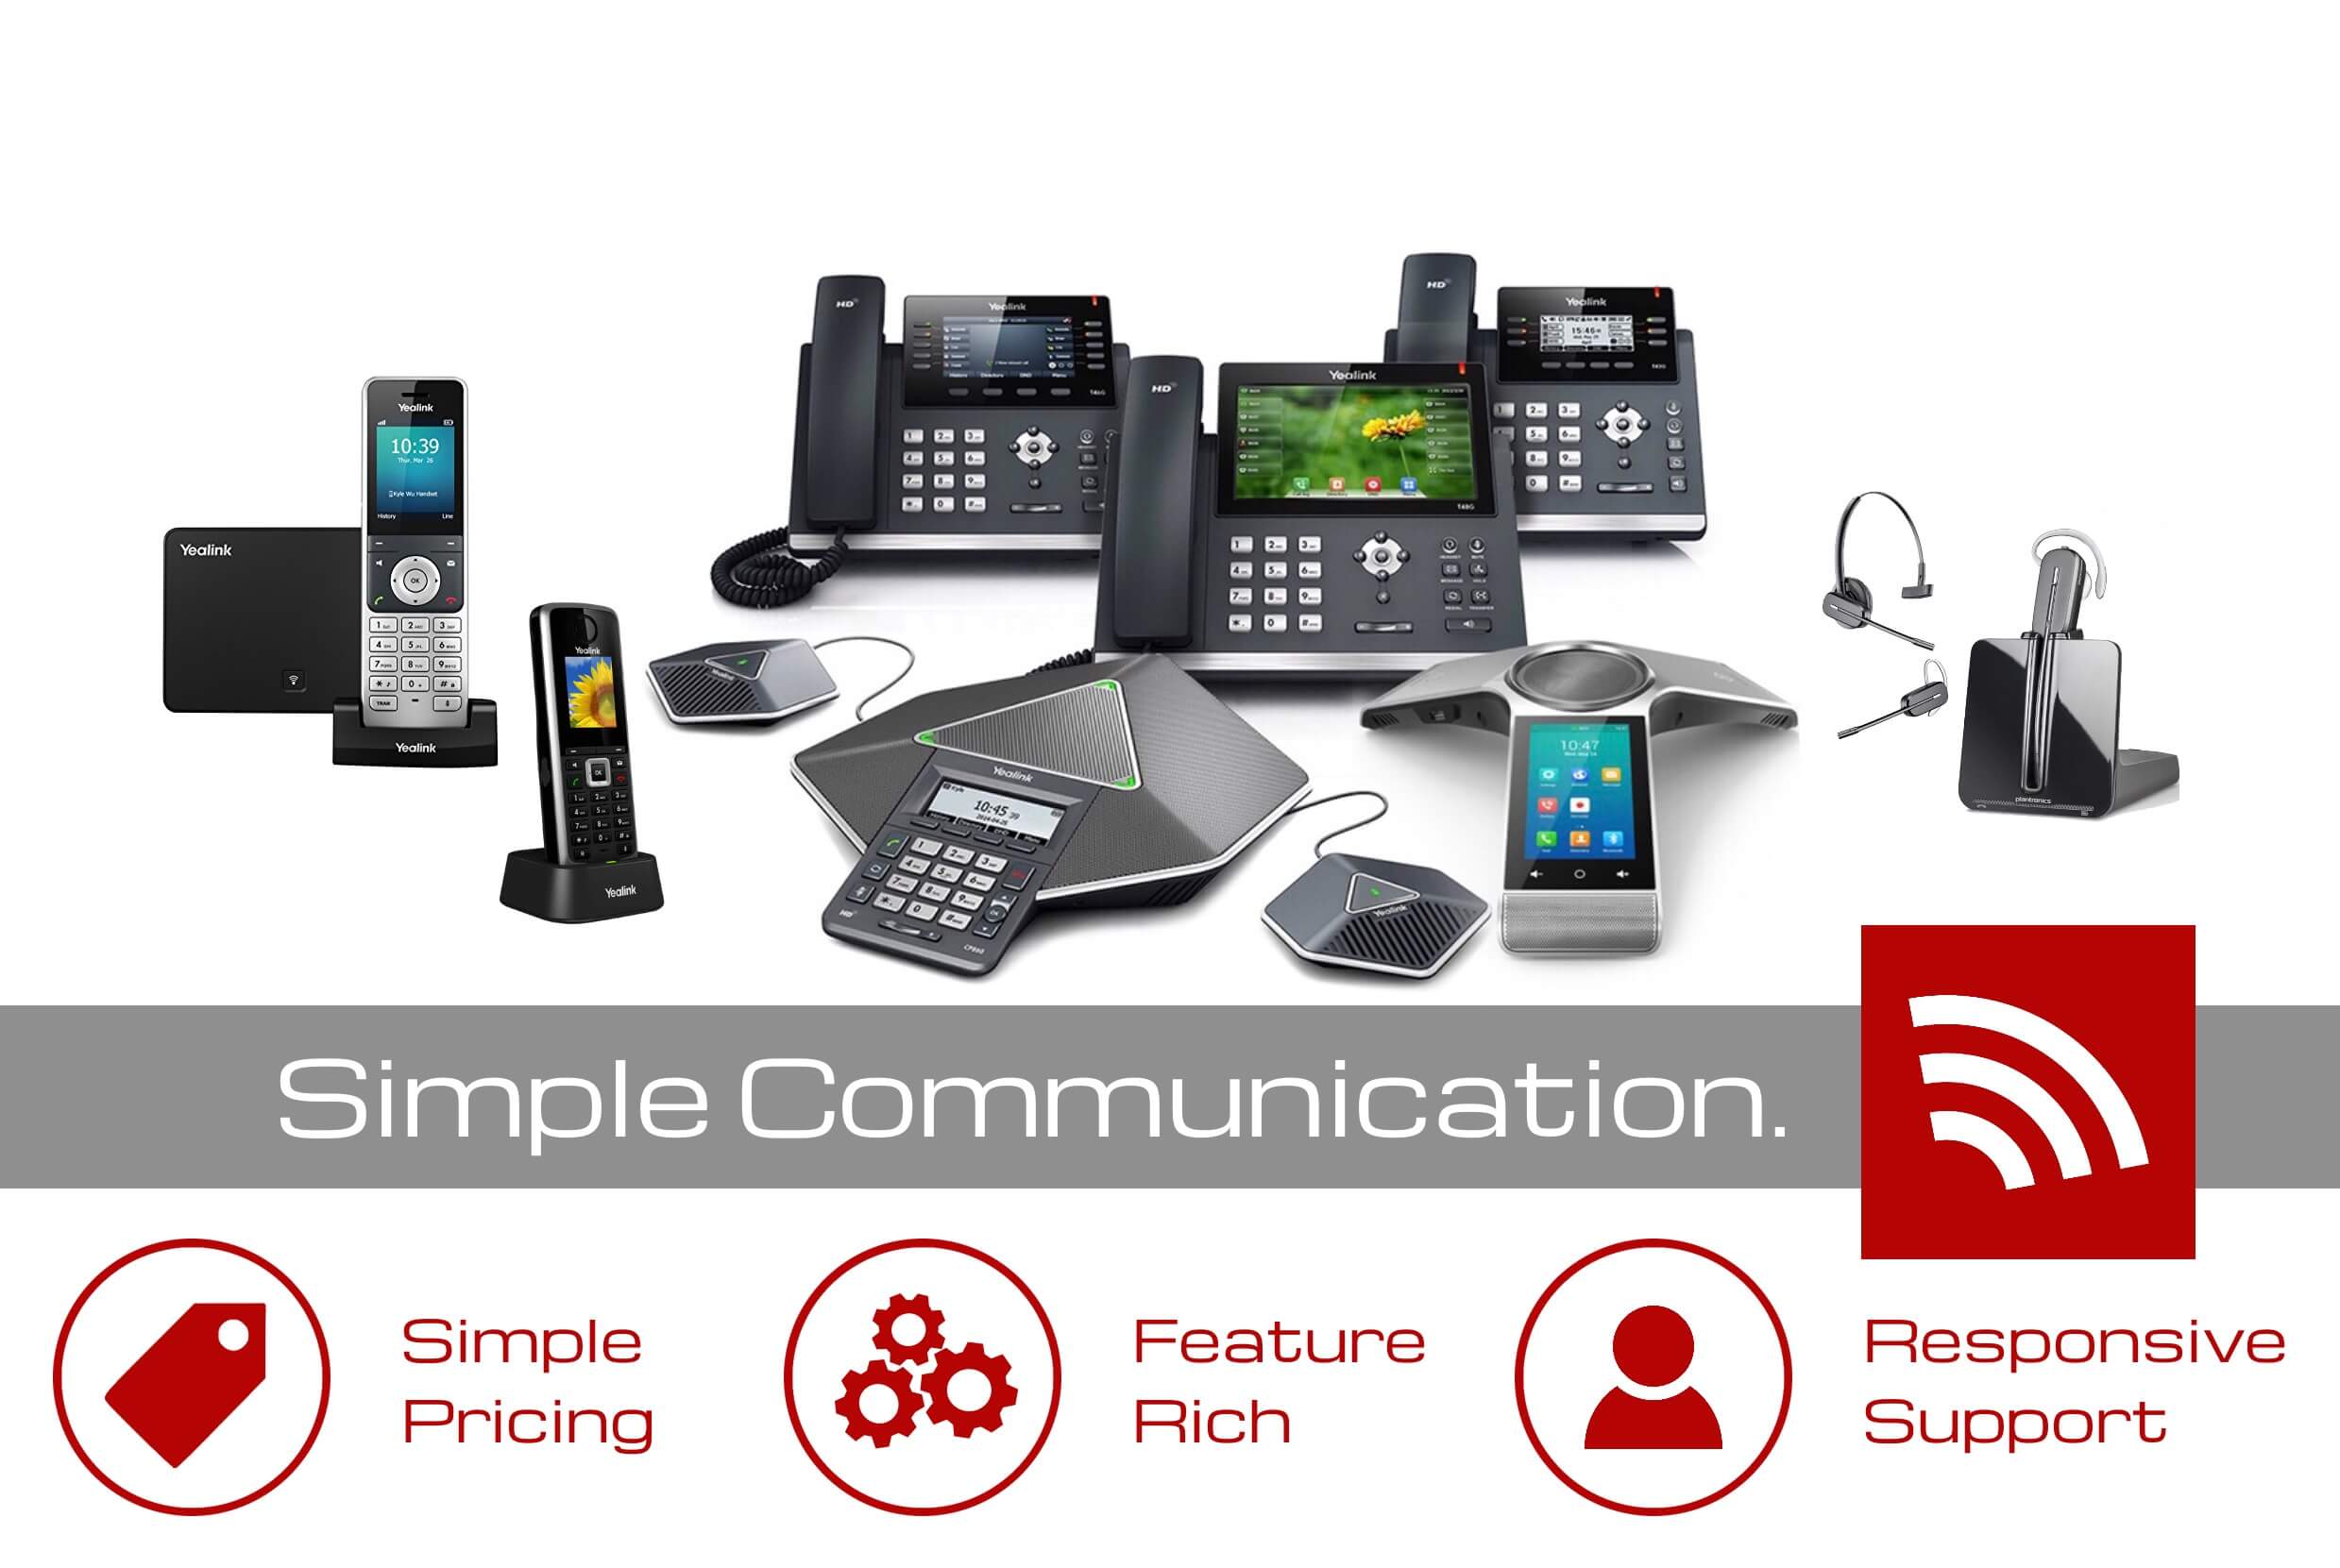 VorTech Communications | Holland, Michigan | Hosted VoIP | Telecommunications | Phones | Phone Company Near Me | Local | Business Phone System | Voice Over IP | App | Responsive Service | Feature Rich | Simple Pricing | VoIP Phone System | VoIP Providers | VoIP Number | Yealink Phones |